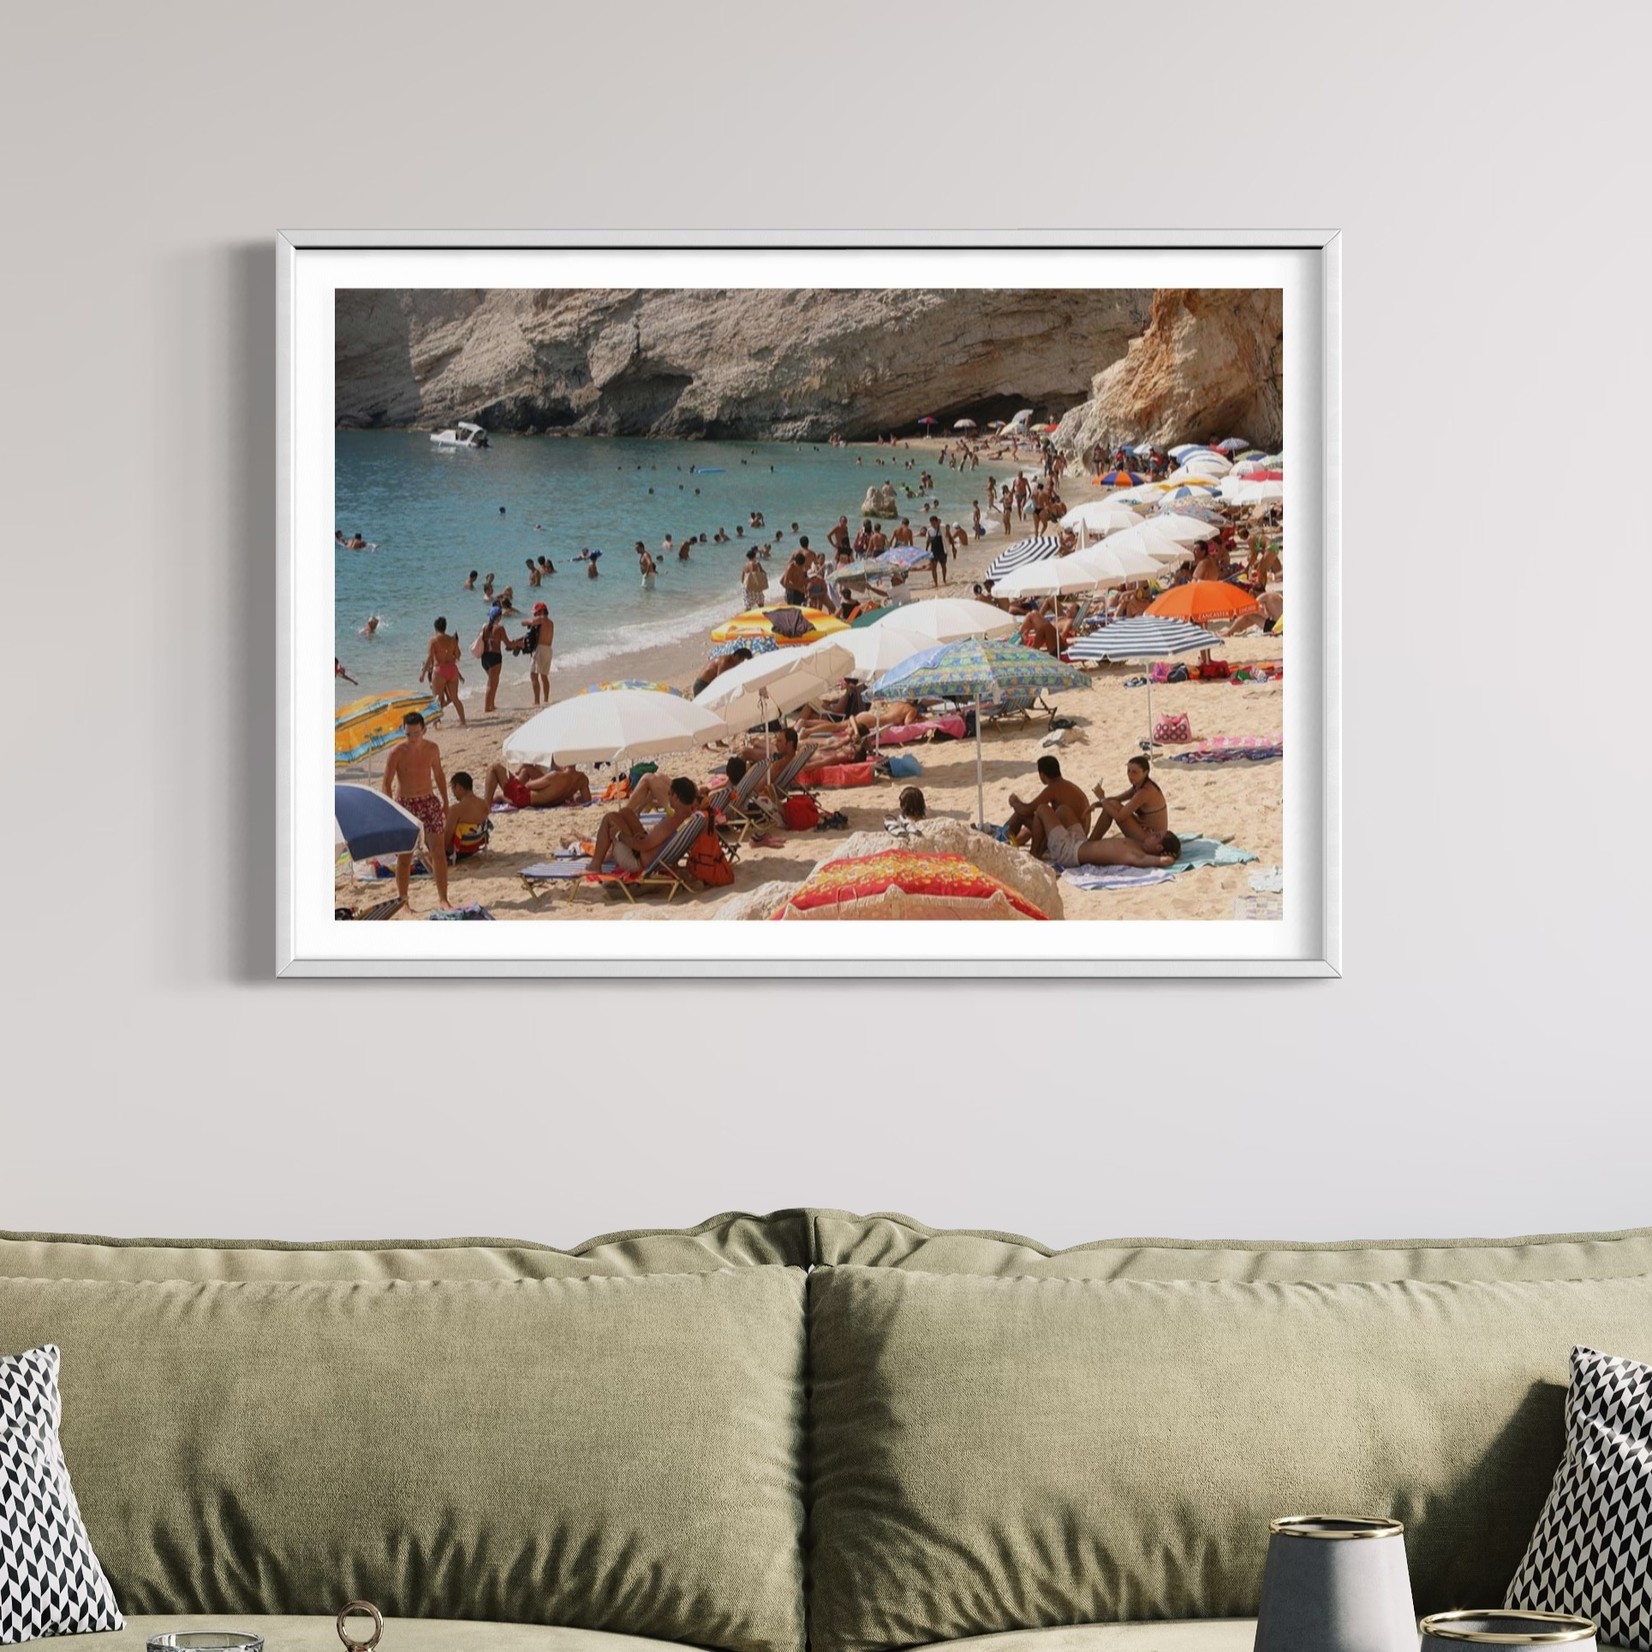 Framed Print on Rag Paper Beaches Draw Summer Tourists To Lefkada Island by Sean Gallup via Getty Images Gallery